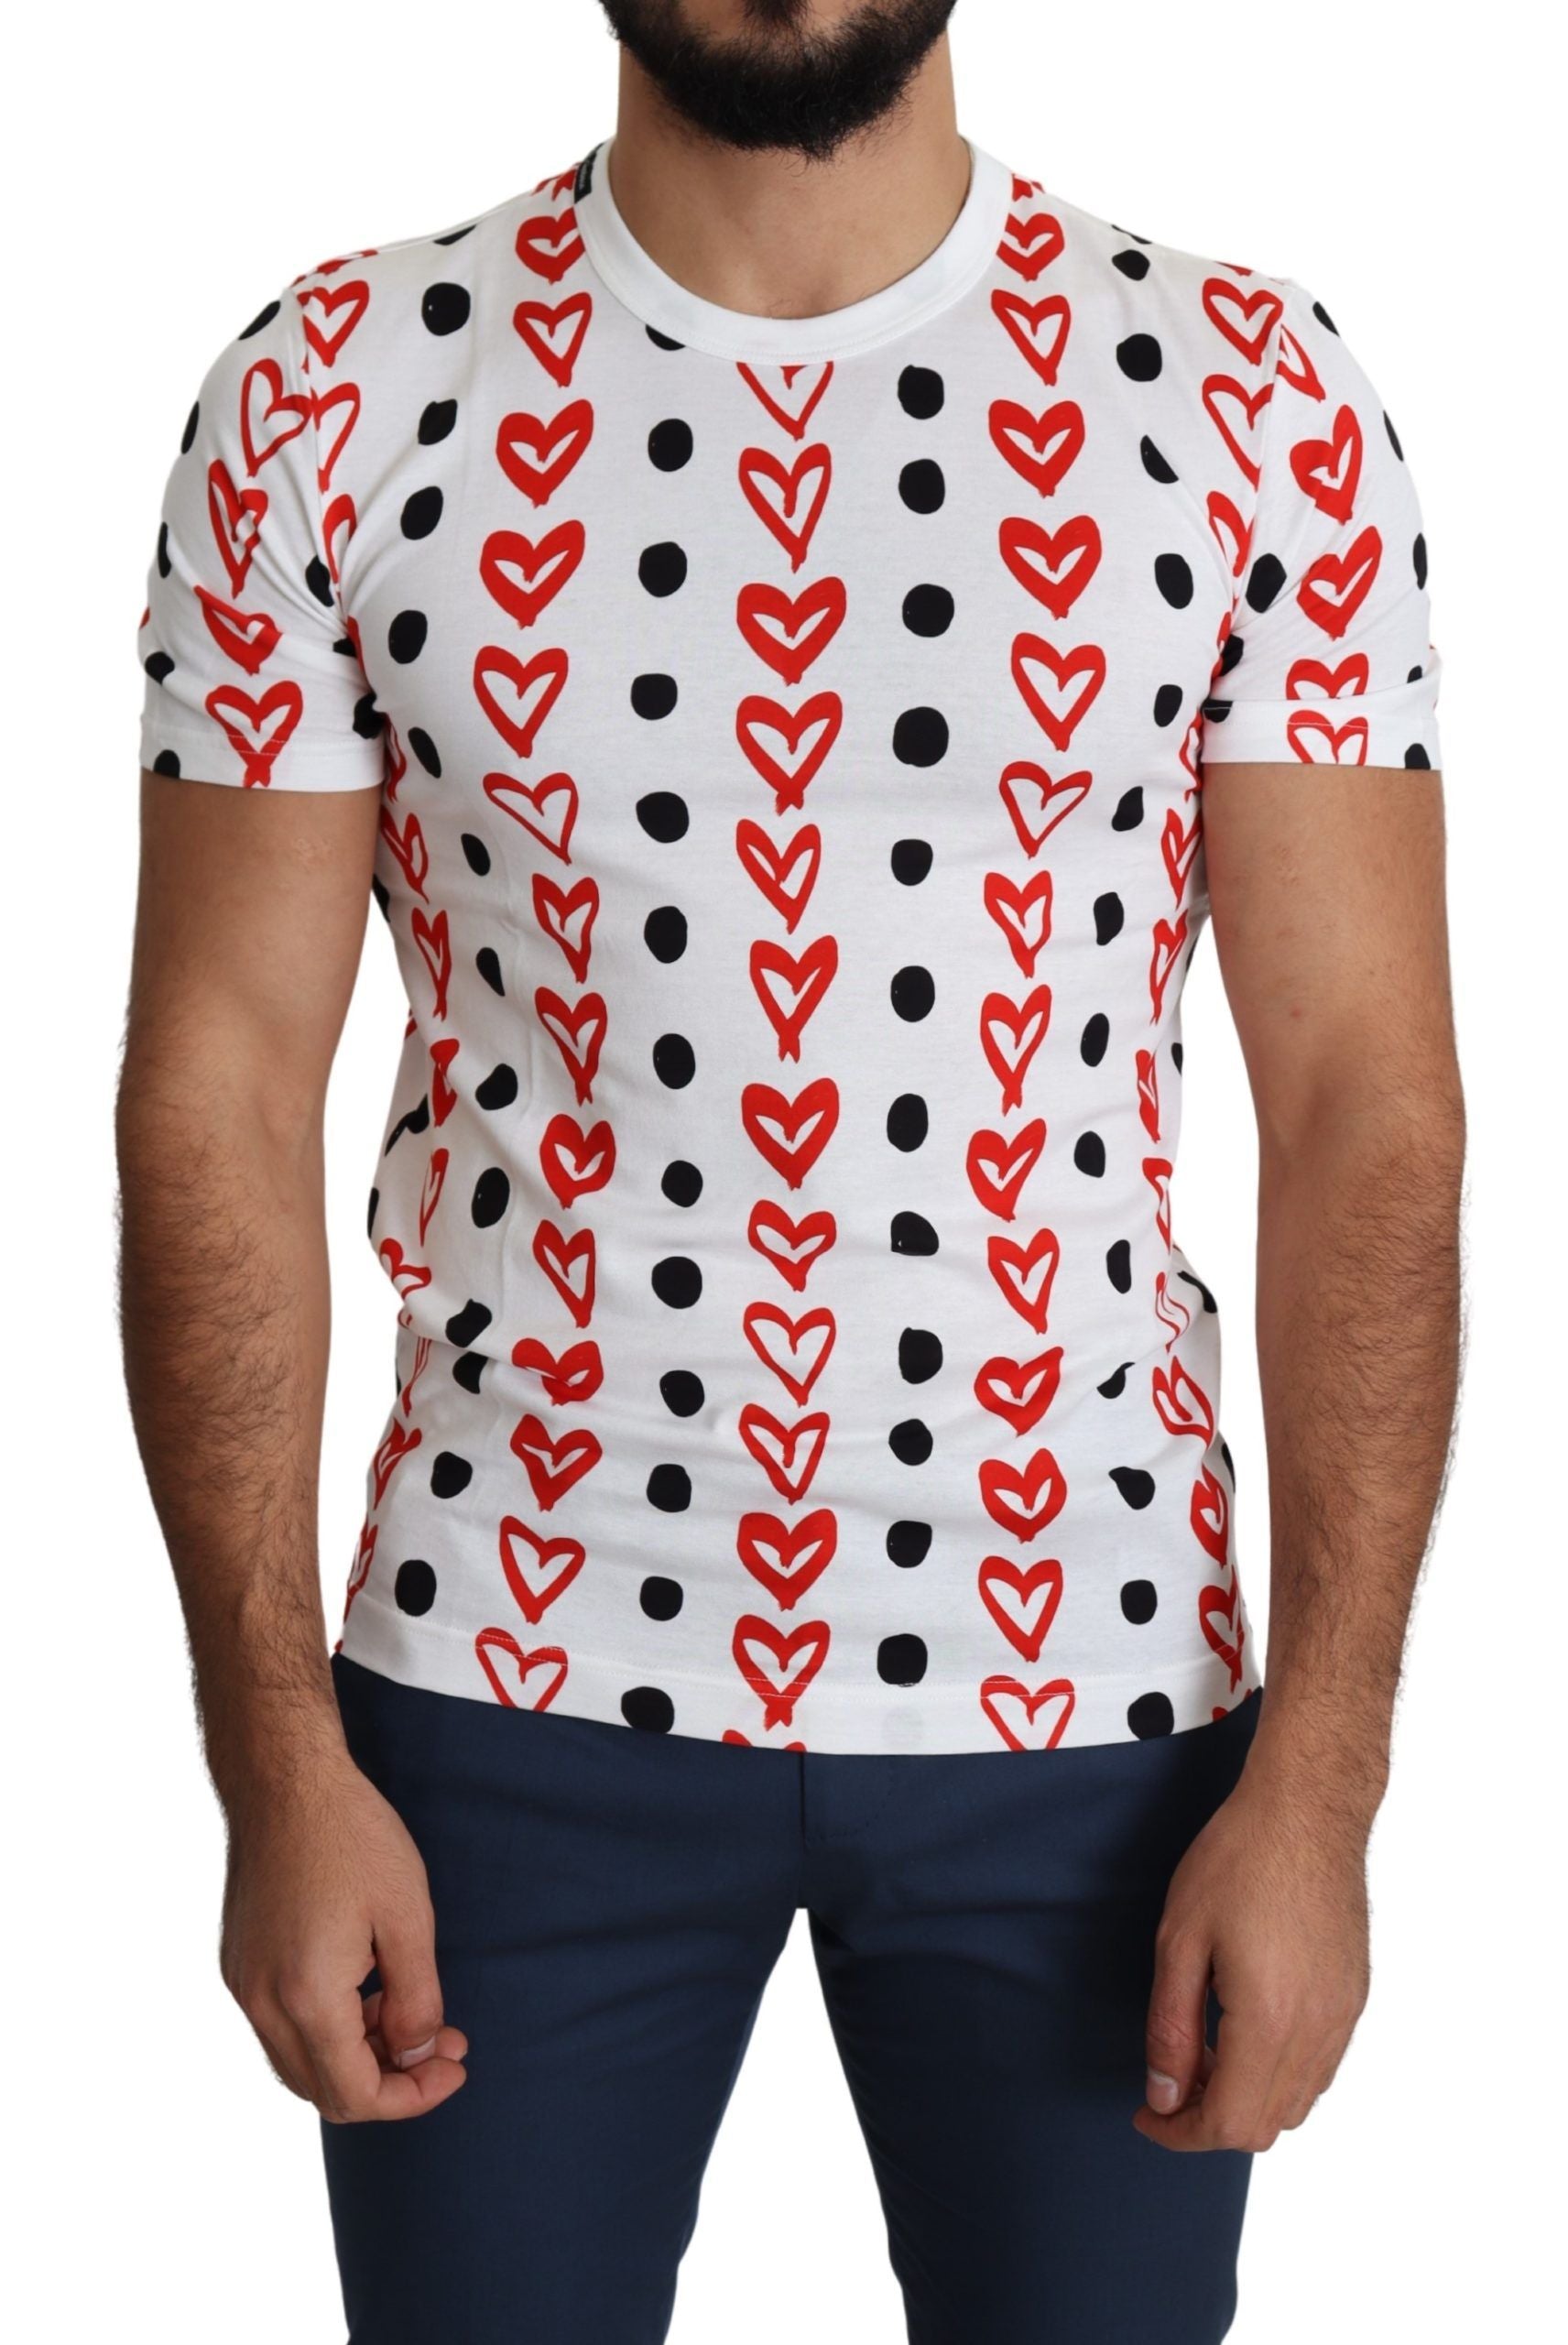 Chic White Cotton Tee with Heart Print